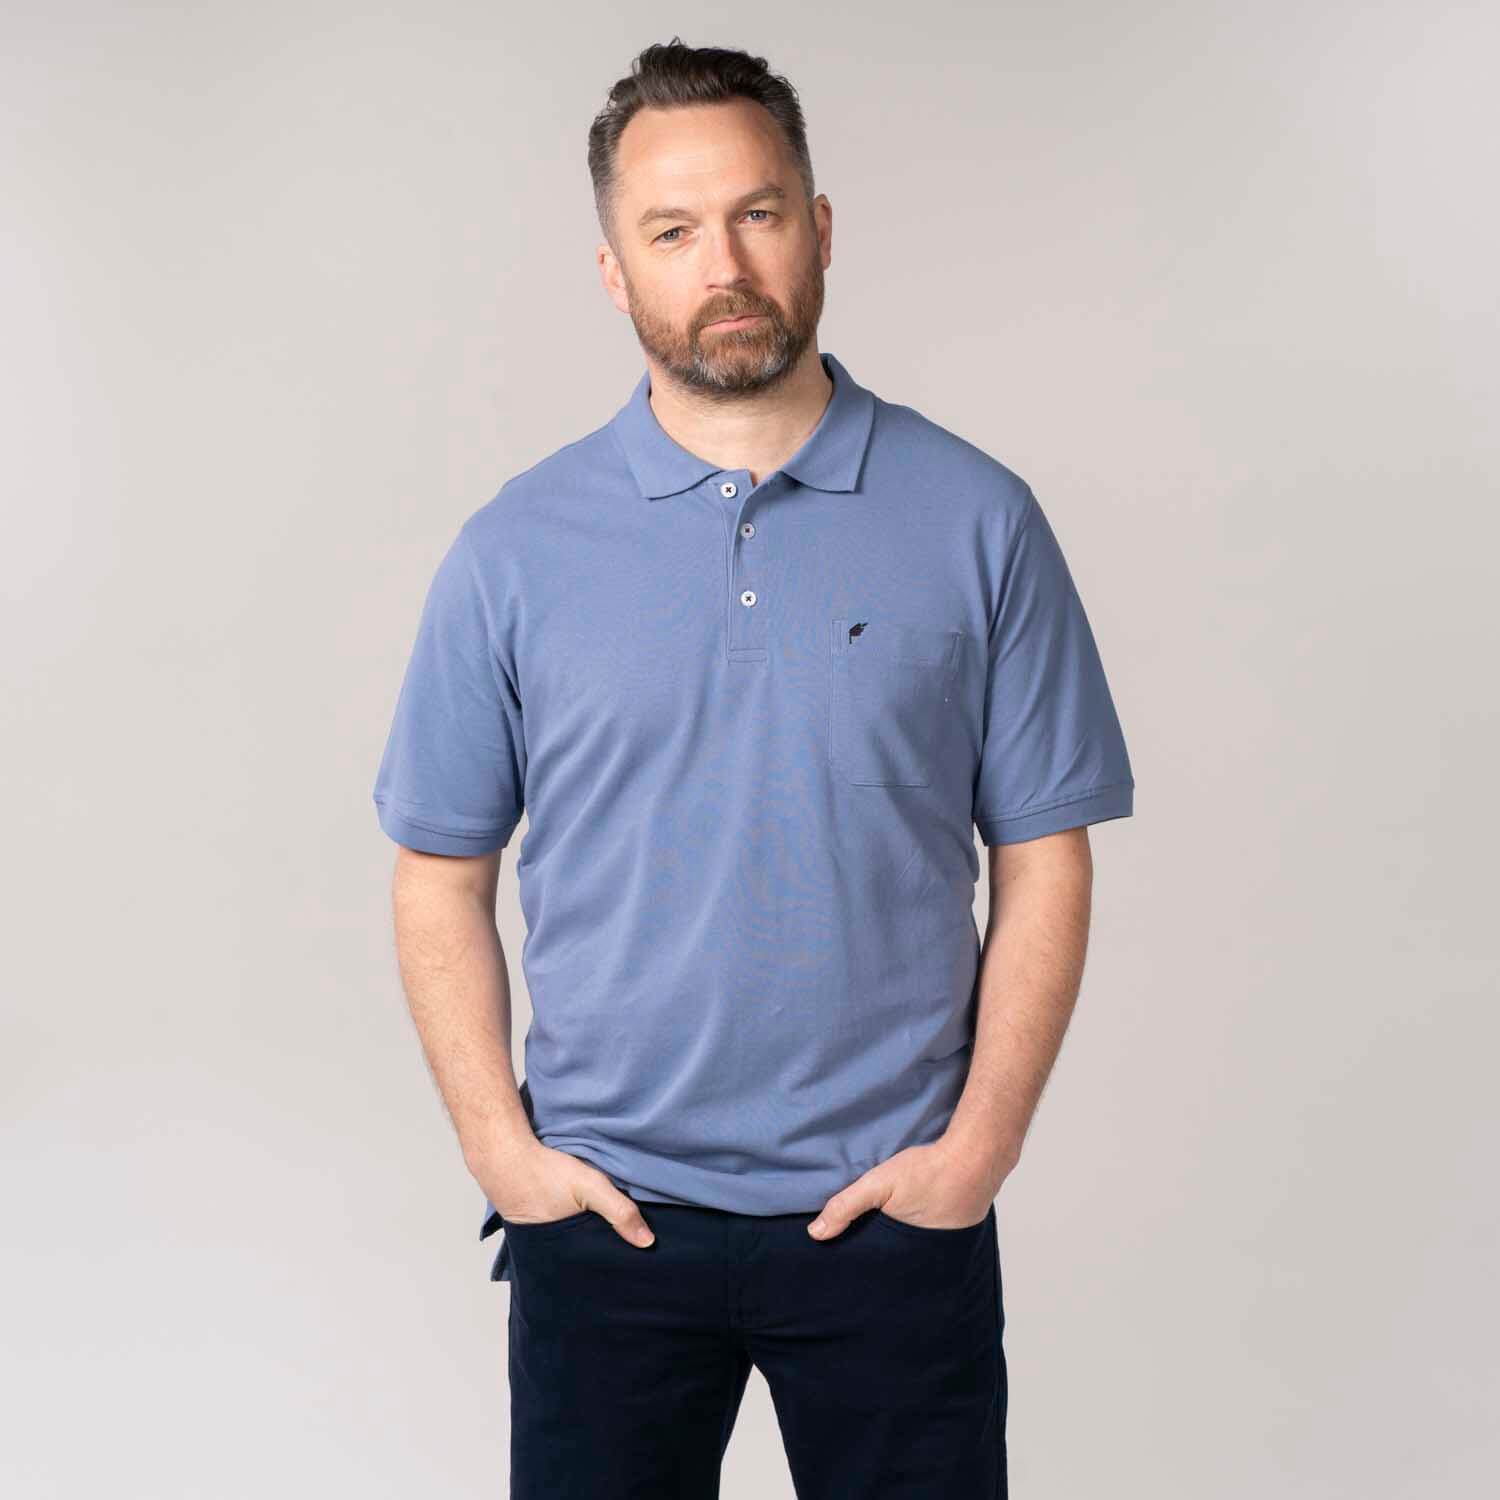 Yeats Niels Short-sleeve Polo - Colony Blue 3 Shaws Department Stores